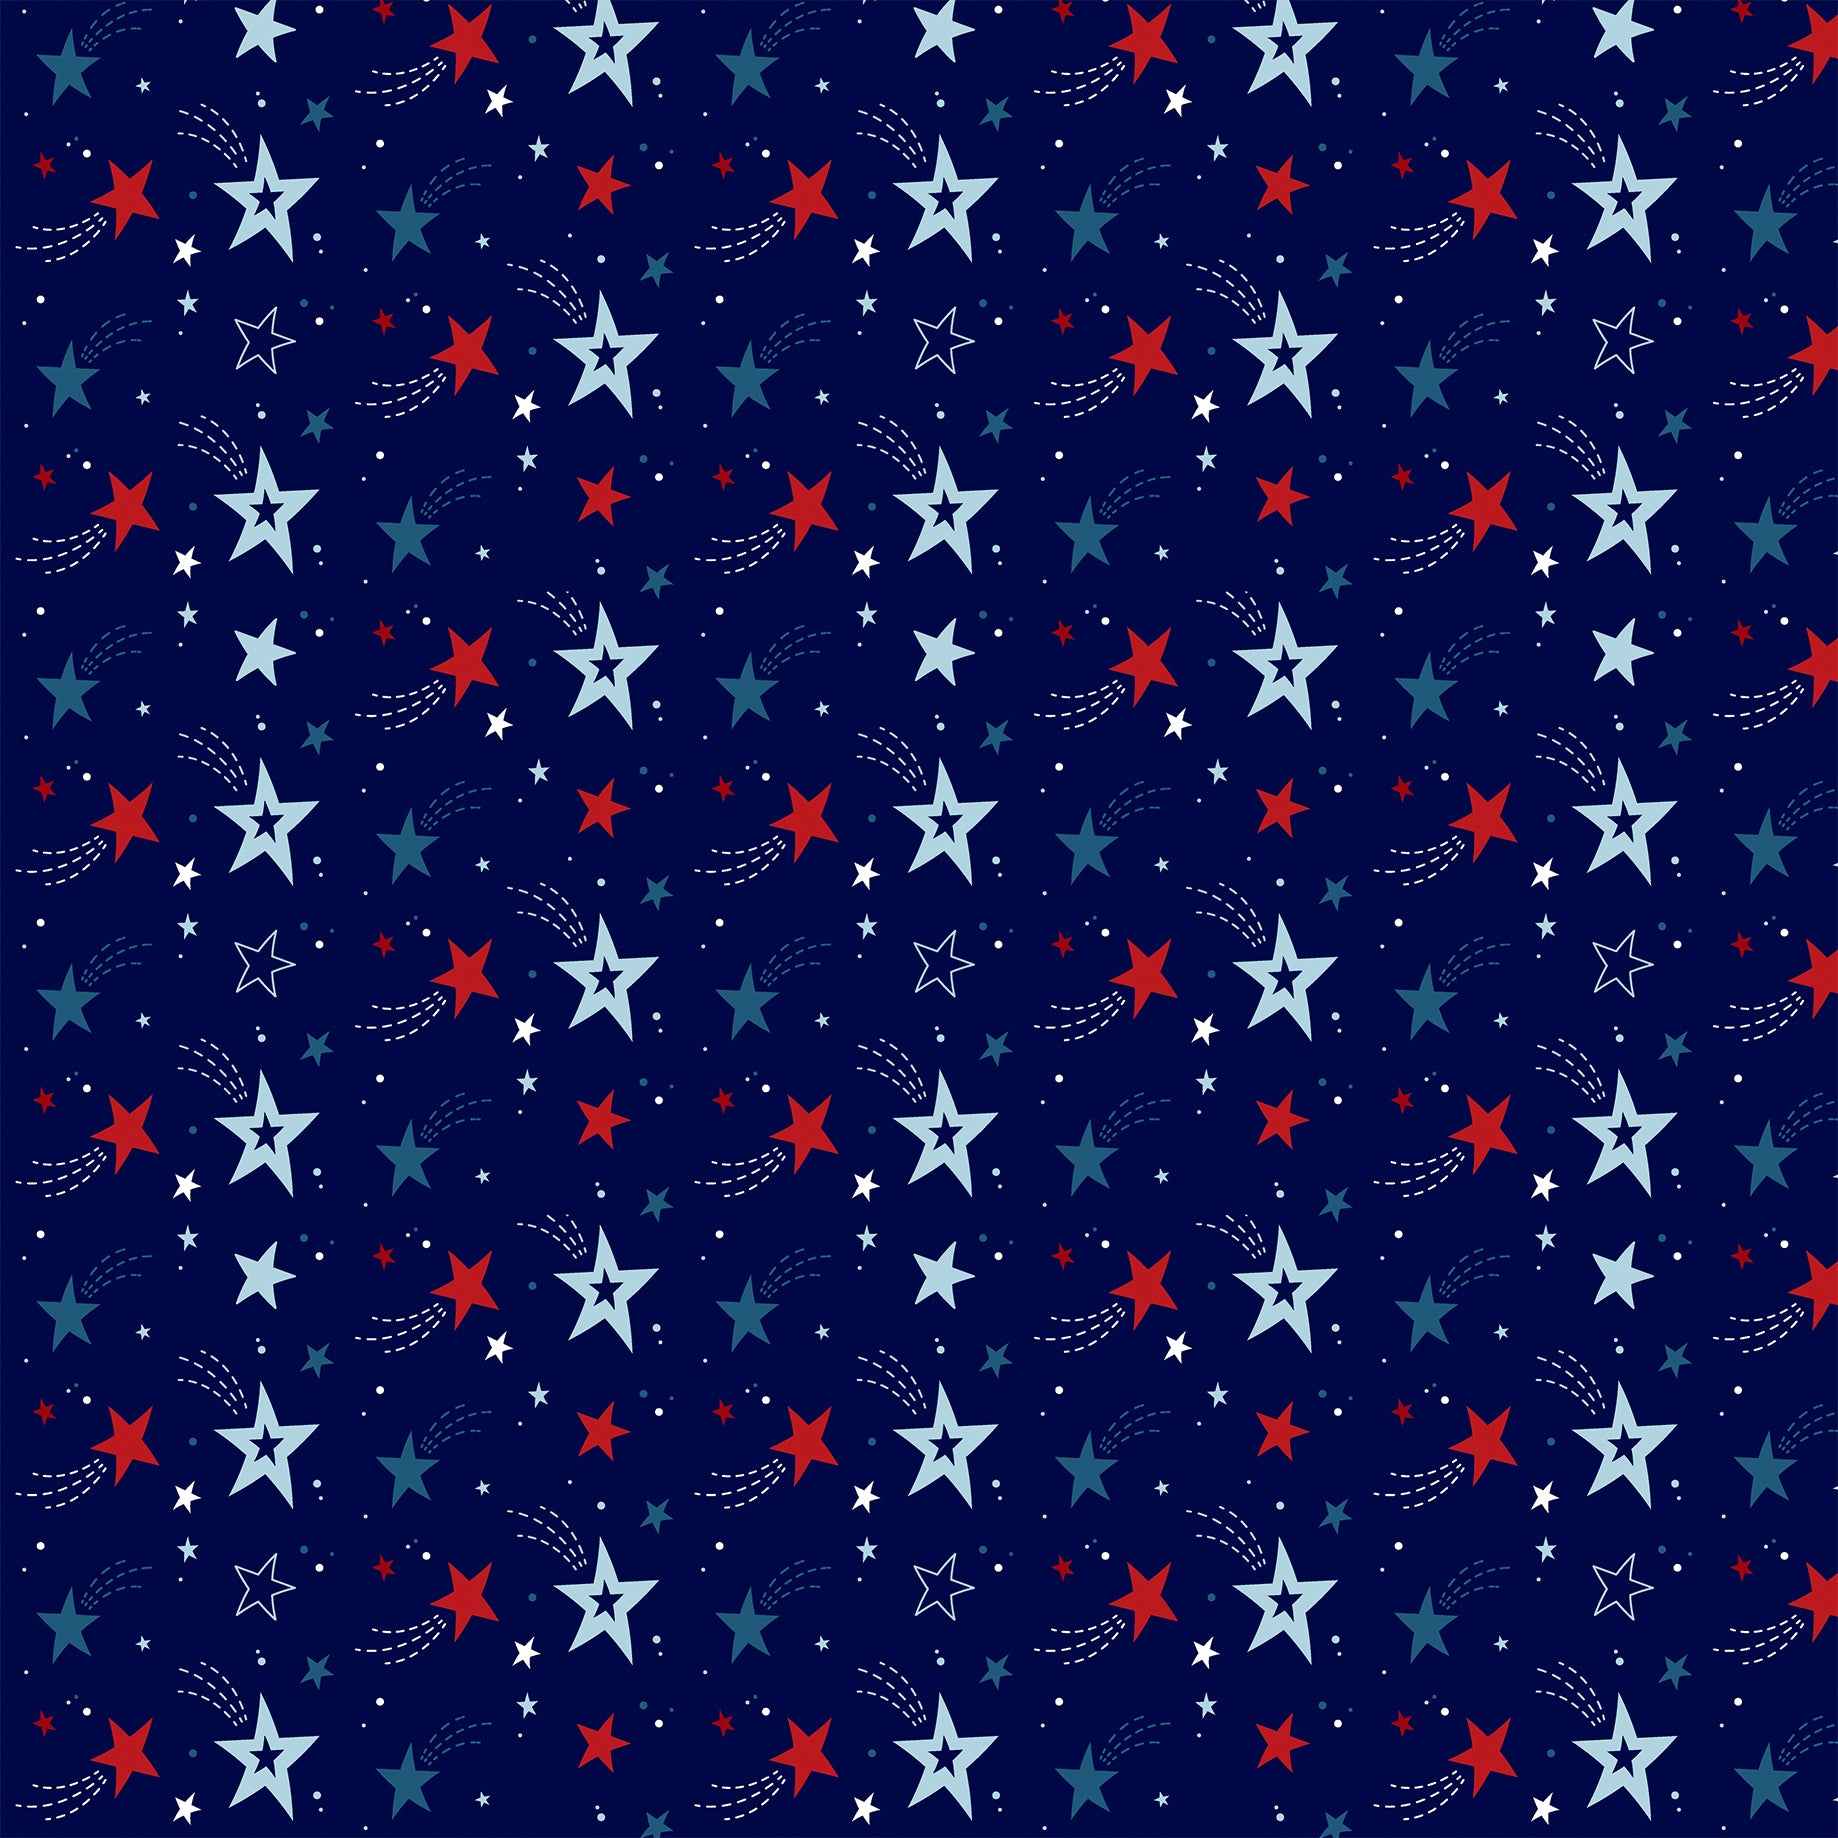 Stars and Stripes Forever Collection Shooting Stars 12 x 12 Double-Sided Scrapbook Paper by Echo Park Paper